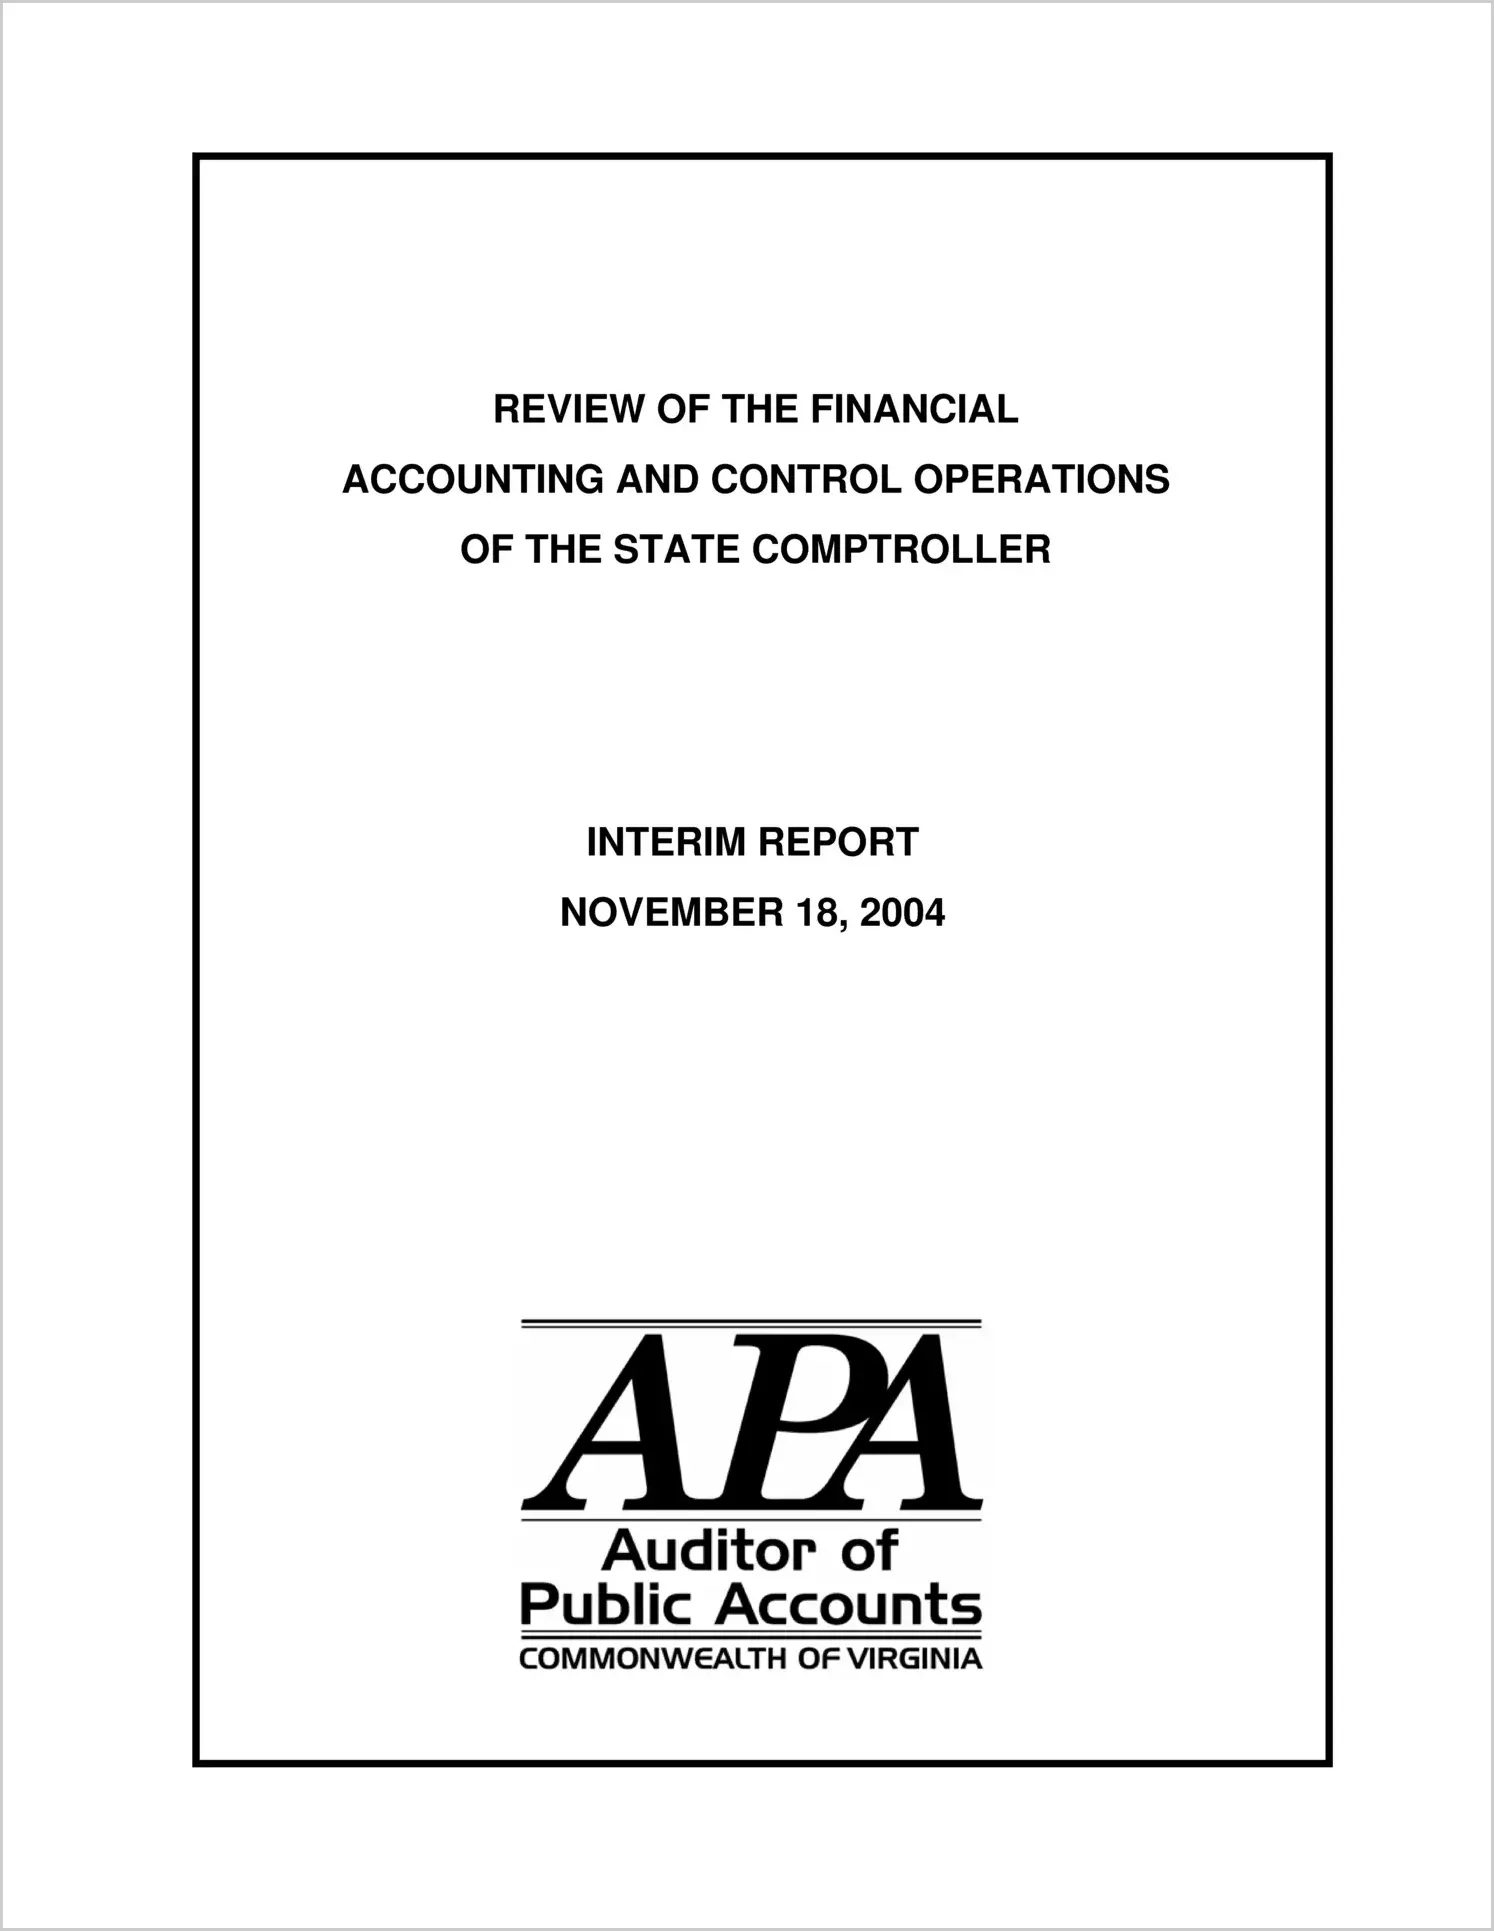 Special ReportReview Of The Financial Accounting and Control Operations of The State Comptroller Interim Report(Report Date: 11/18/2004)  Hard copy of report is available upon request.